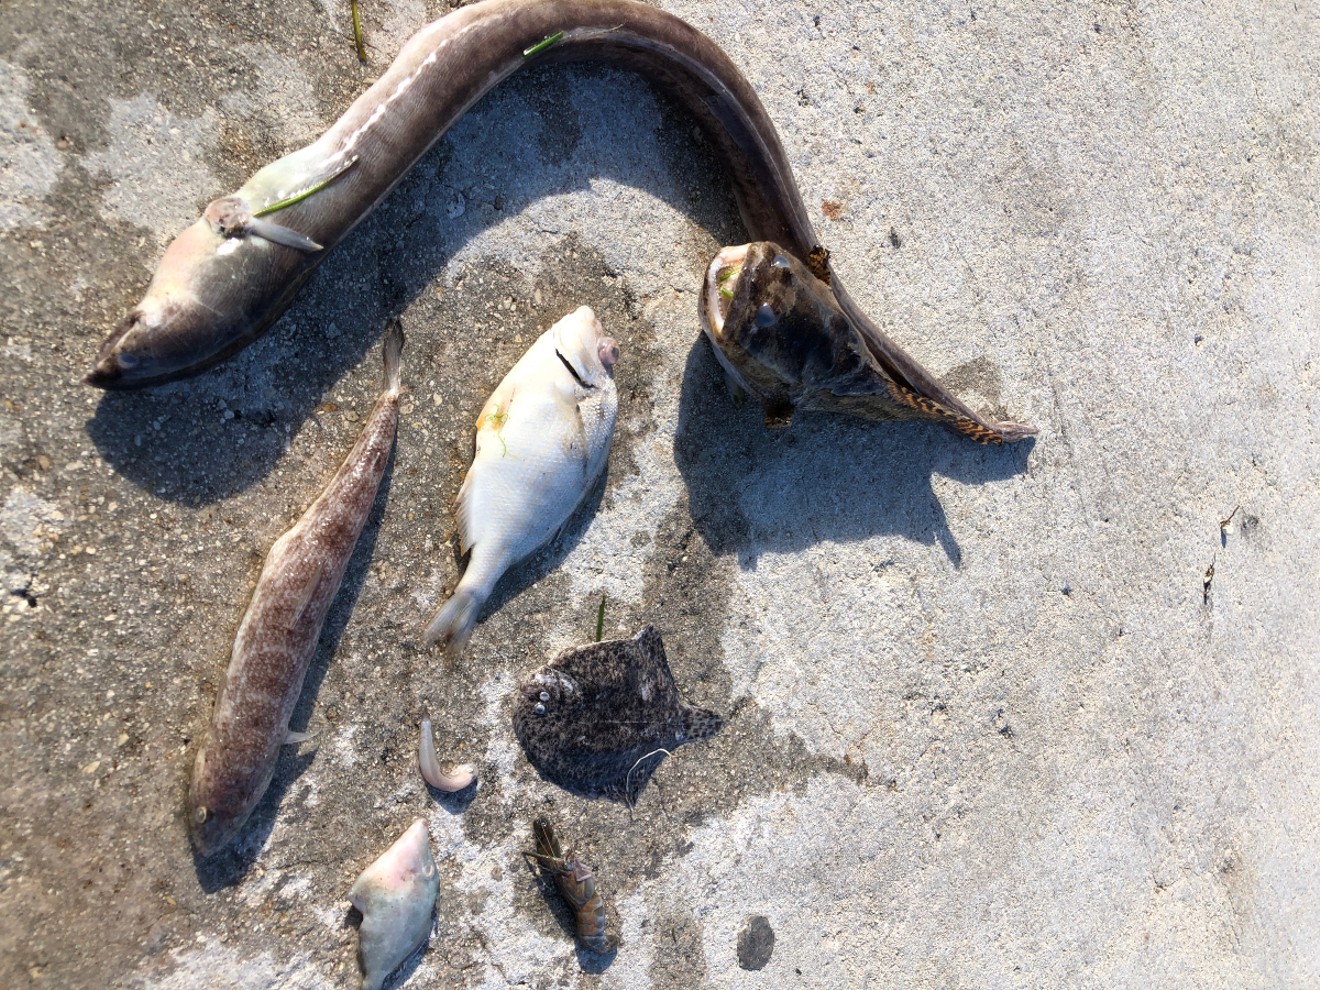 Fish are dying in Biscayne Bay.